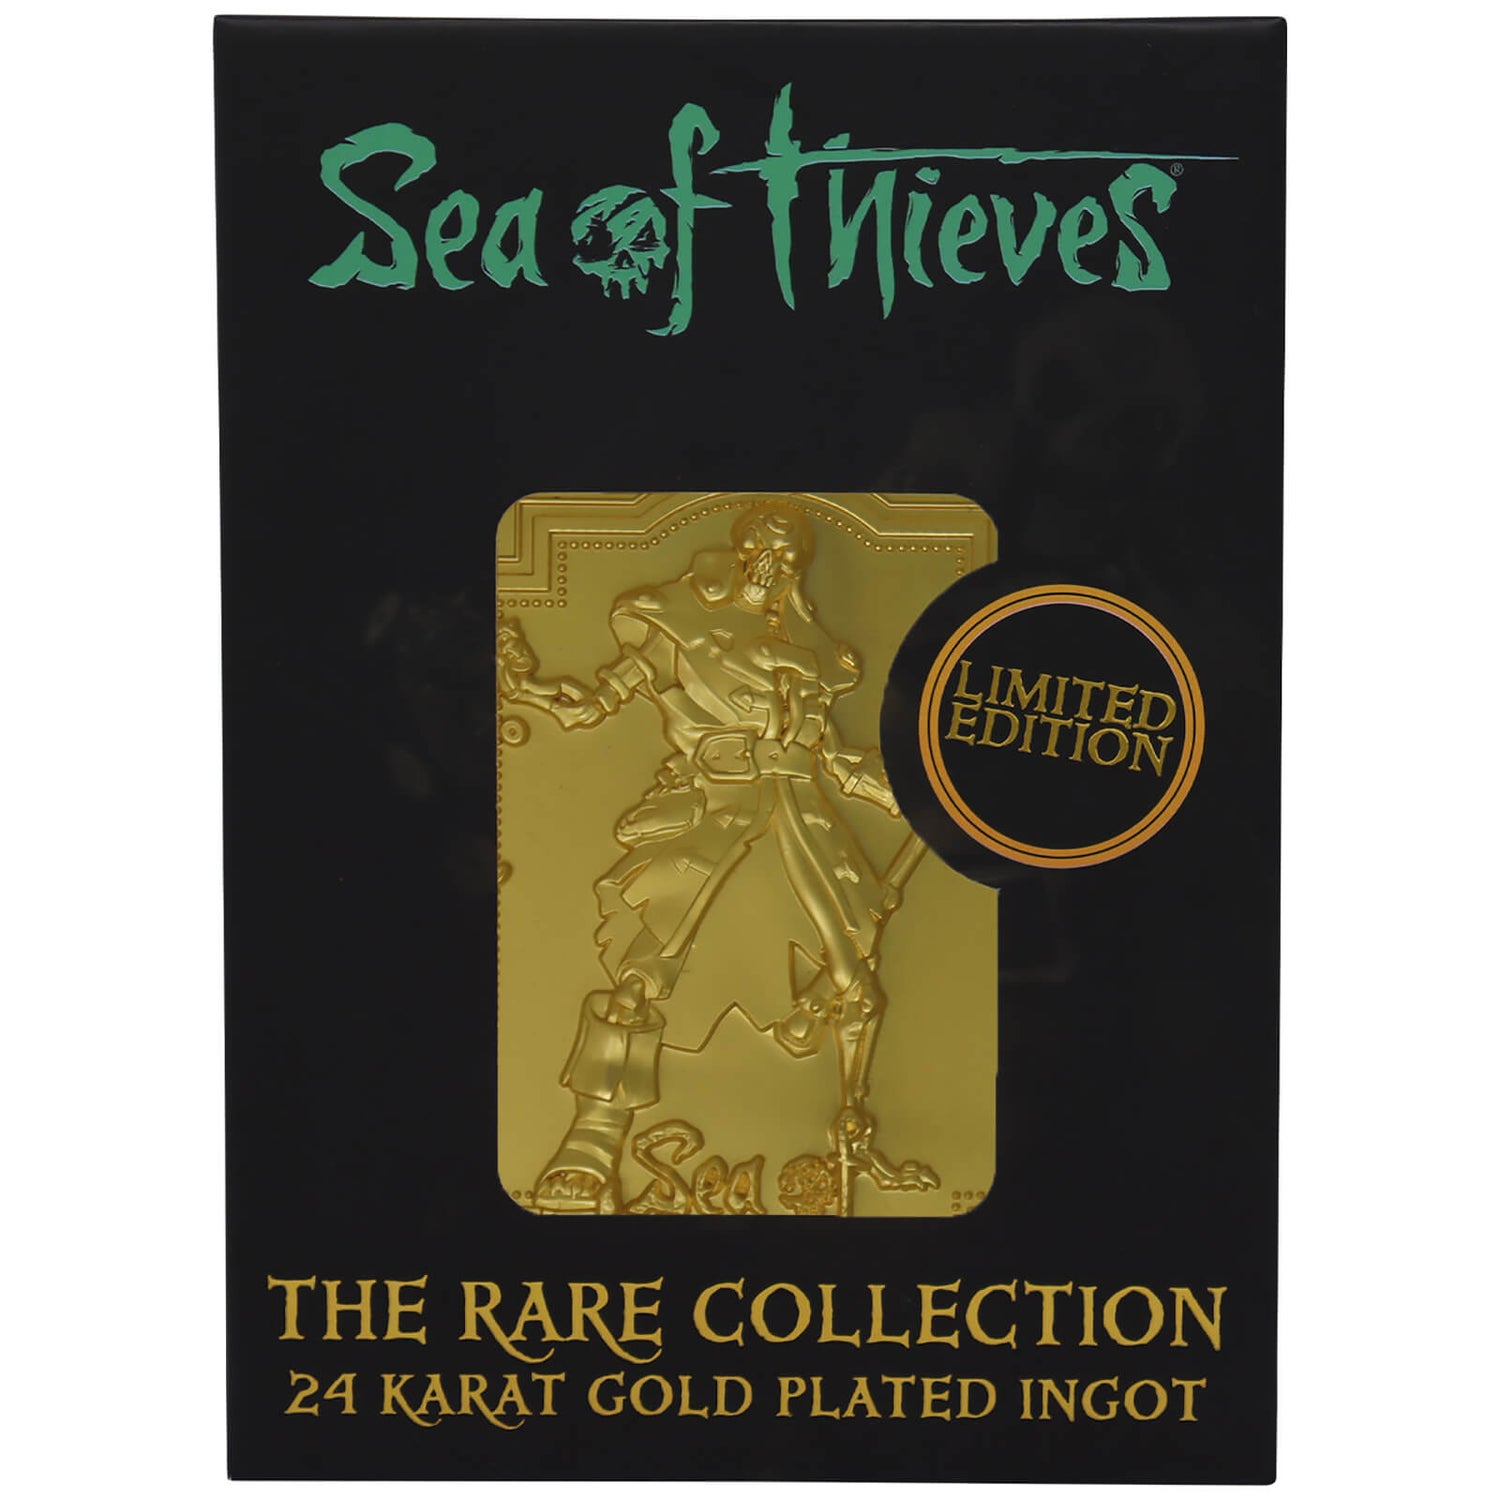 The Rare Collection - Sea of Thieves 24k Gold Plated Ingot